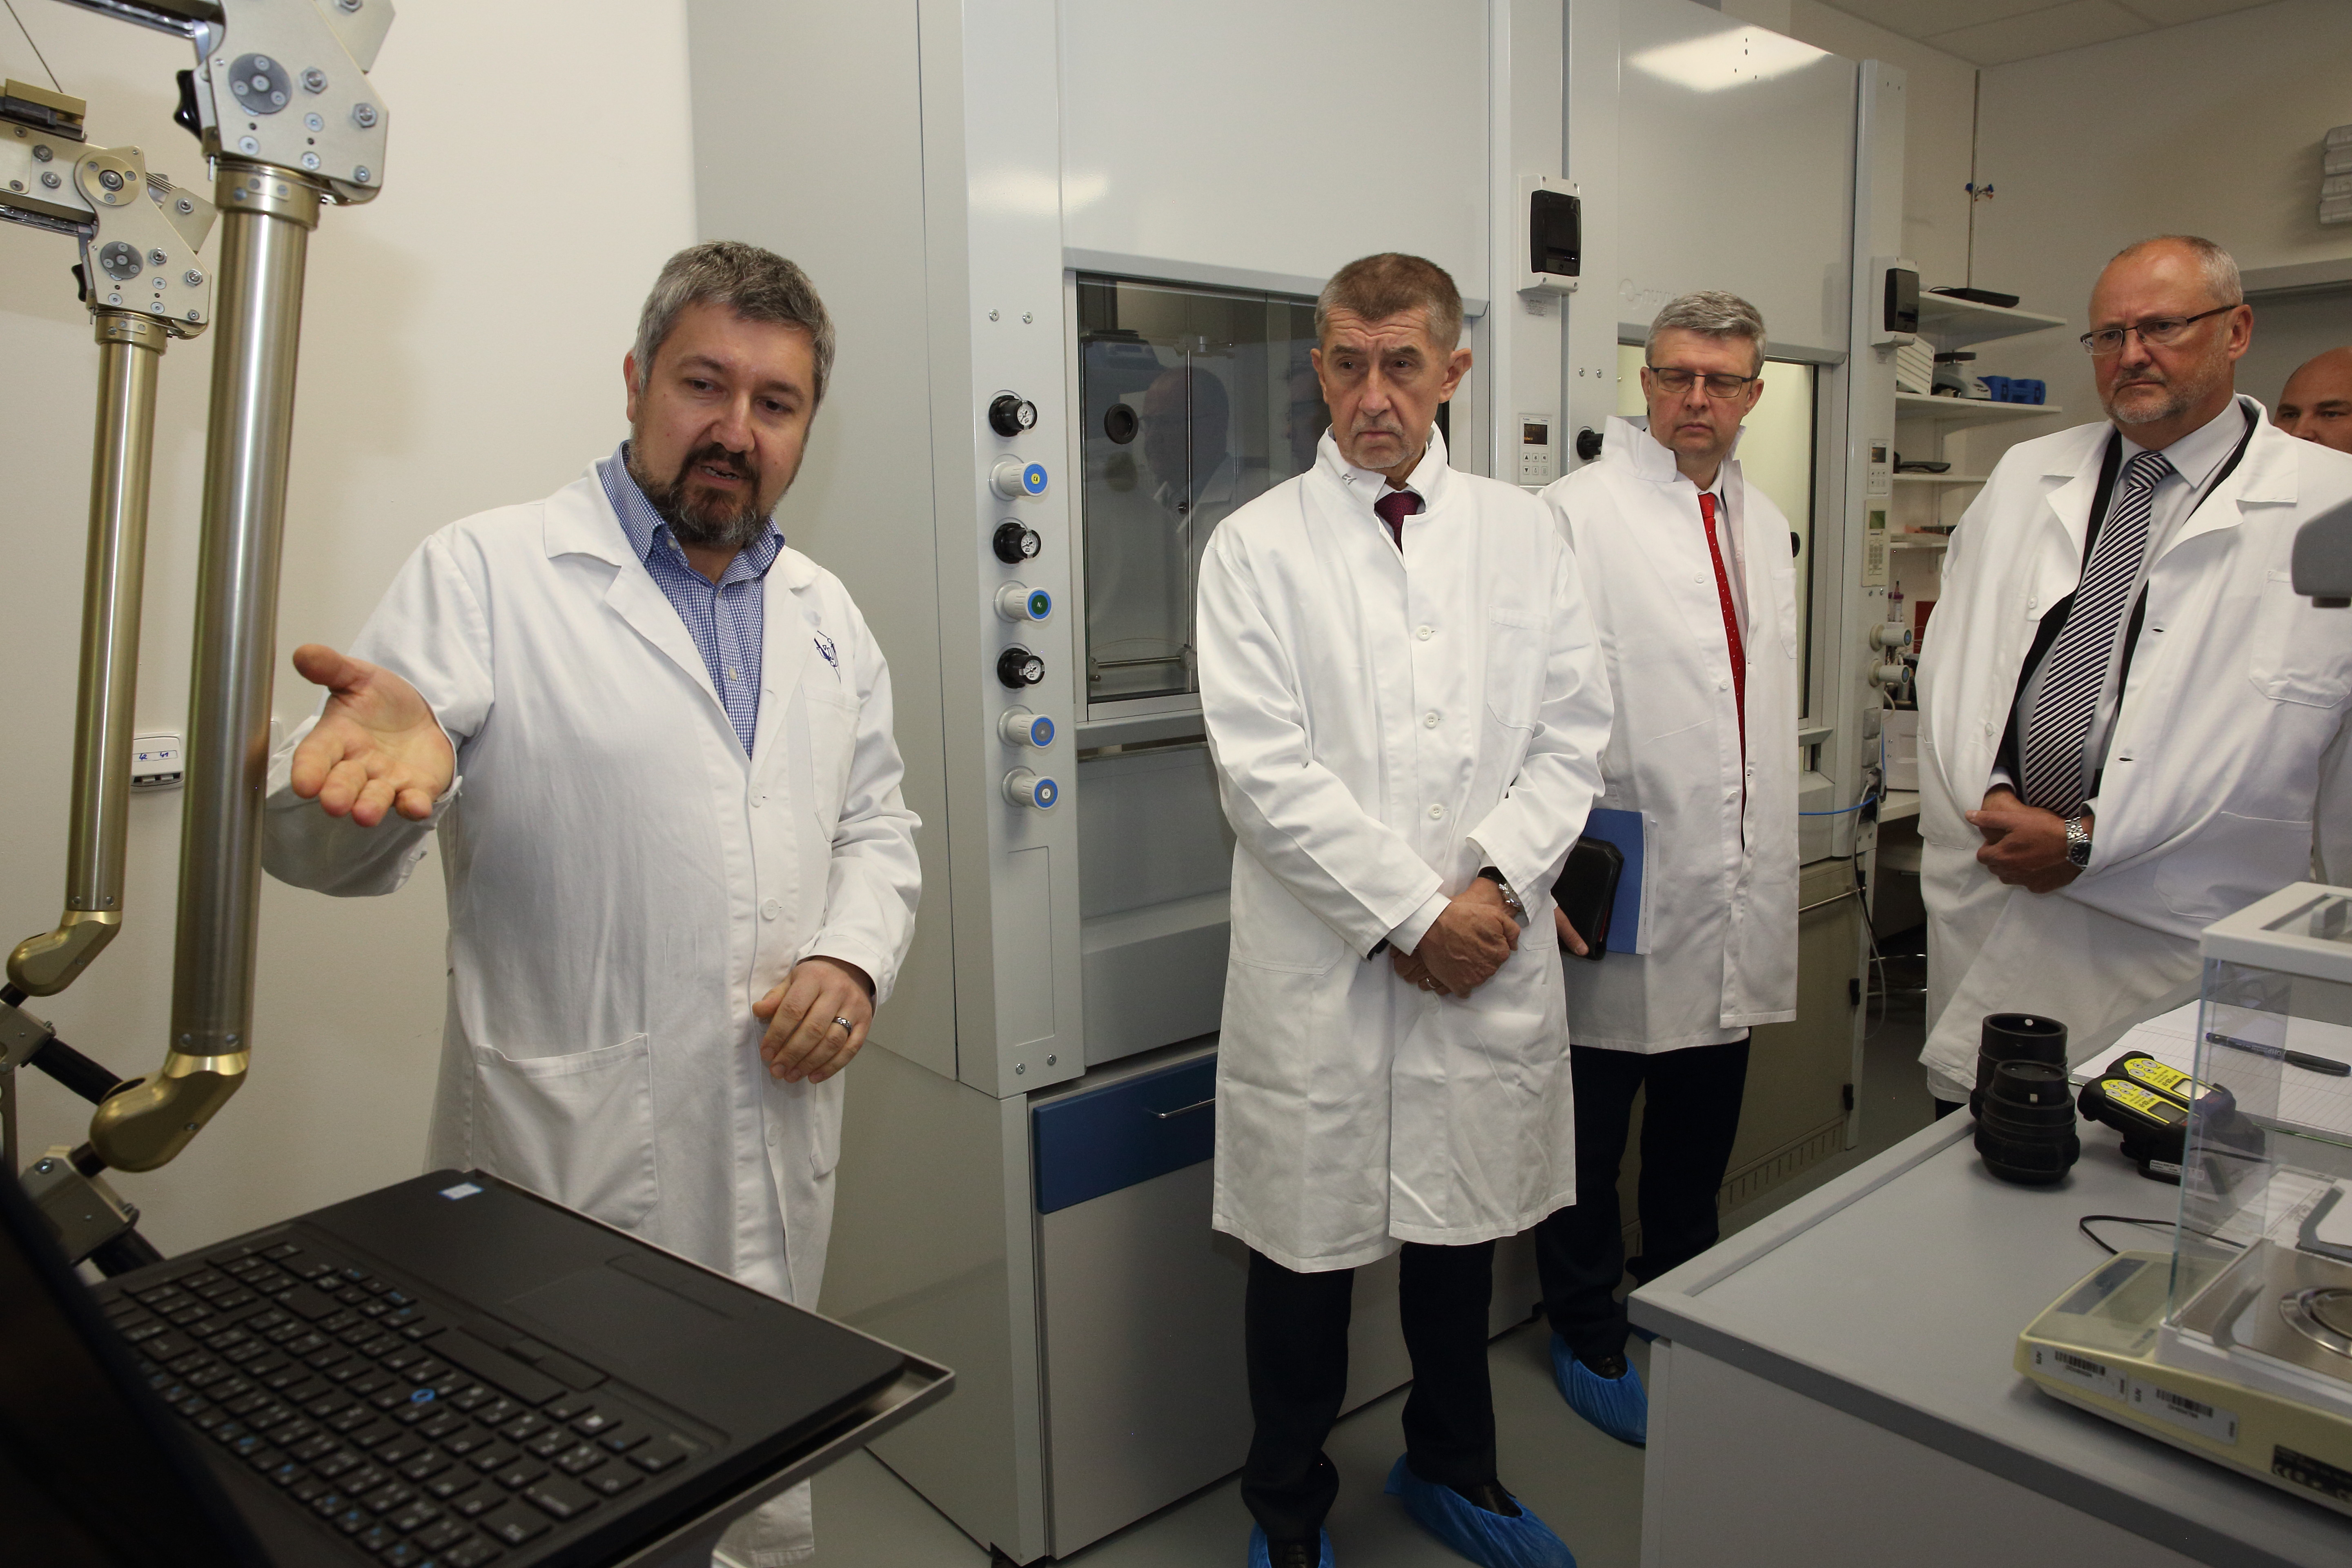 Head of the Department of Radiopharmaceuticals Ondřej Lebeda, Prime Minister Andrej Babiš, Vice-Chair of the Research, Development and Innovation Council Karel Havlíček, and NPI director Petr Lukáš